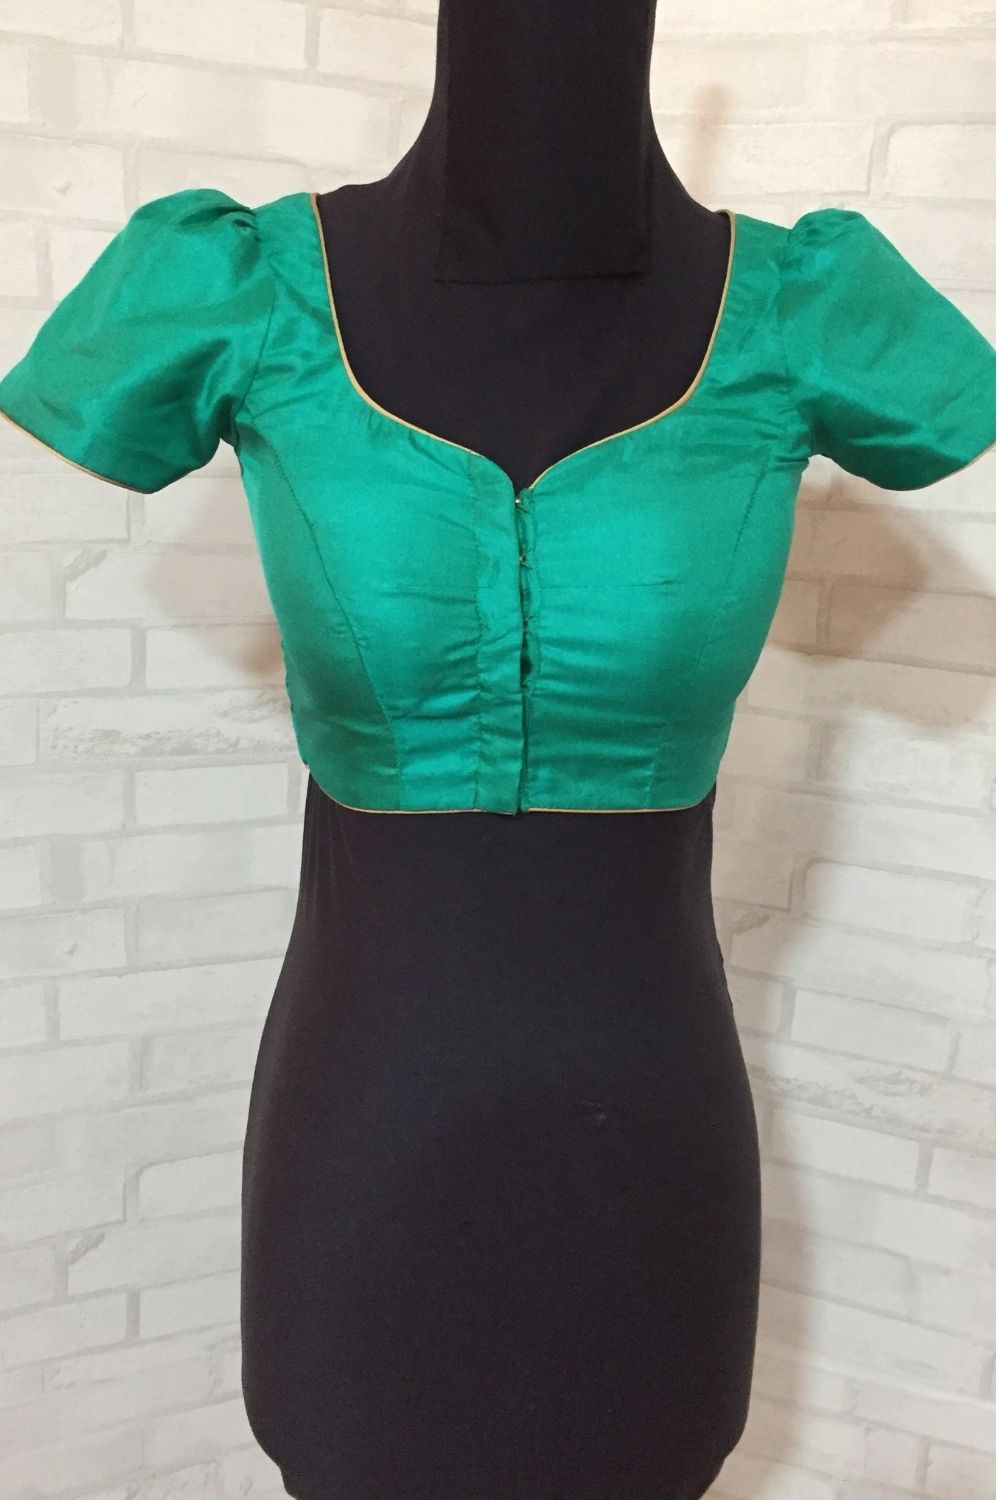 Seagreen sweet heart blouse with a embroidered sheer back - House of Blouse